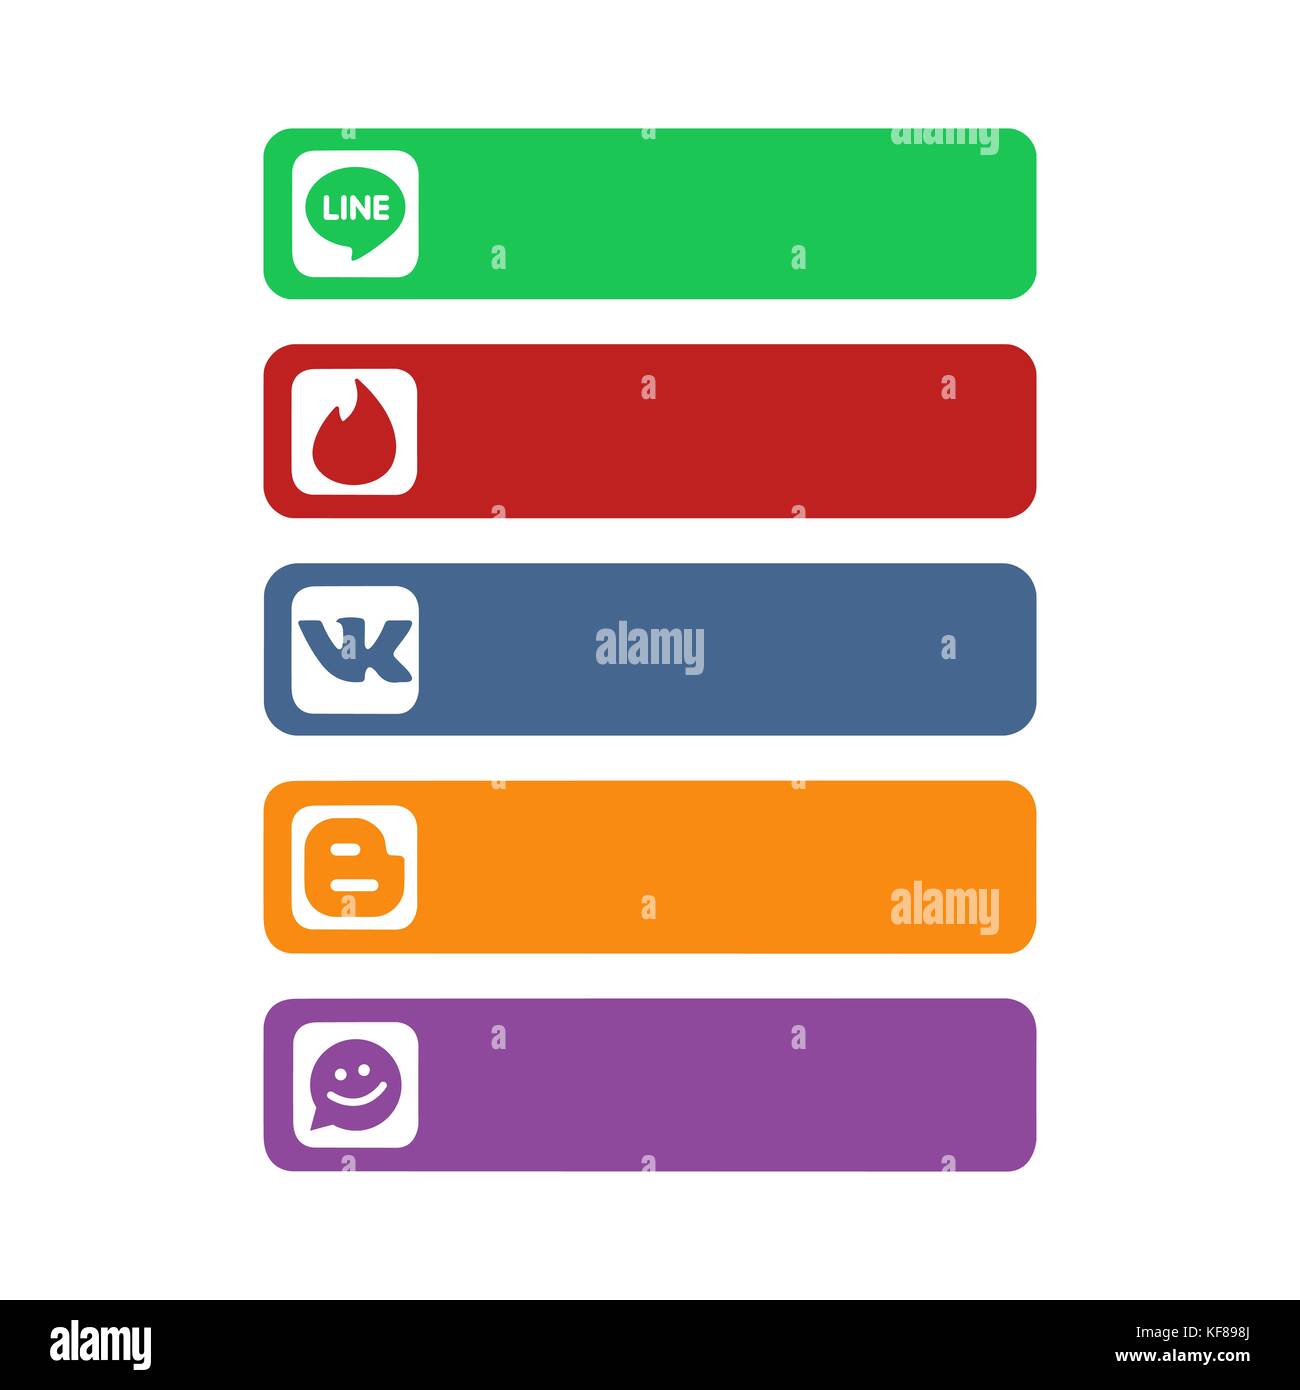 Collection of popular social media logos printed on paper: Line, Tinder, Meet Me and others. Stock Vector